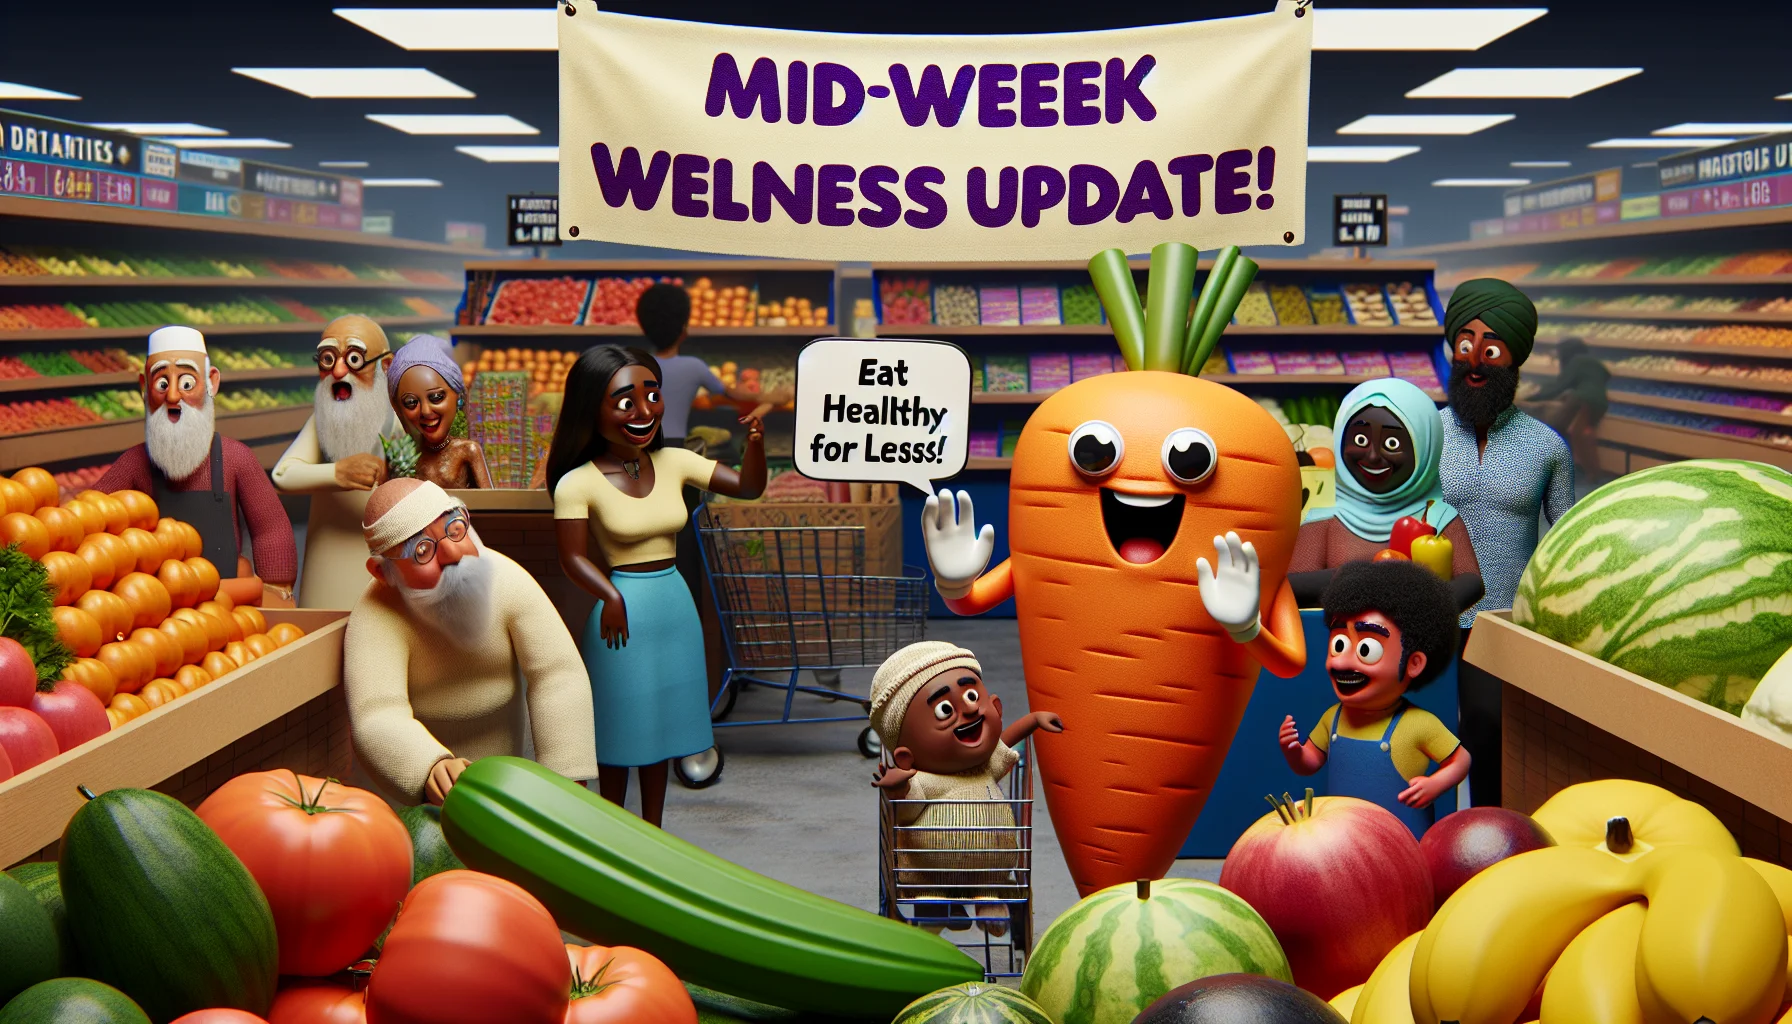 Imagine a humorous and realistic scene centered around a 'Midweek Wellness Update'. A friendly mascot, maybe in the shape of a carrot with googly eyes, is comically waving a banner that reads 'Eat Healthy for Less!'. In the background, a grocery store scene with shelves stocked with a vibrant array of fruits and vegetables. There could be a few shoppers, with each having distinct characteristics: an elderly Asian man carefully choosing apples, a young Black woman laughing while reaching for a bunch of bananas, and a Middle-Eastern child in awe at the sight of oversized pumpkins. This playful scenario emphasizes the affordability of maintaining a balanced diet.